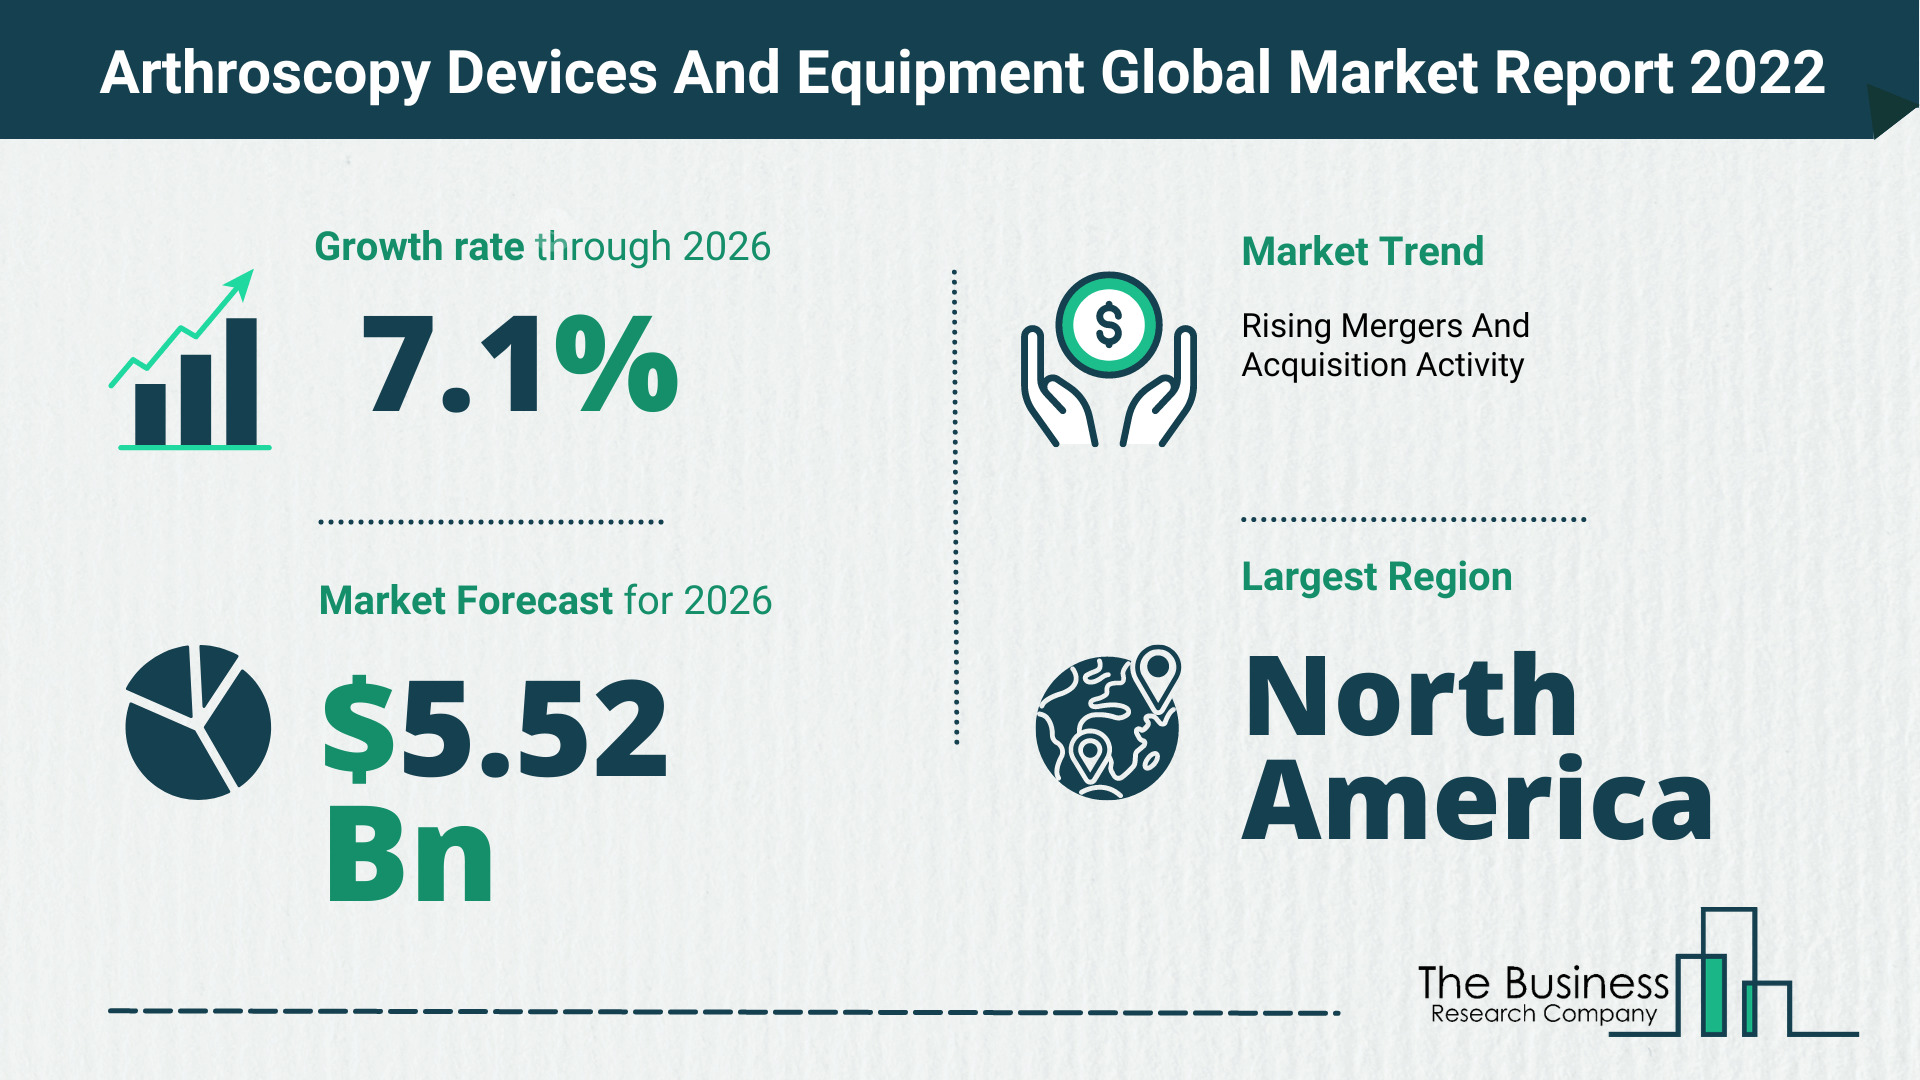 Latest Arthroscopy Devices And Equipment Market Growth Study 2022-2026 By The Business Research Company